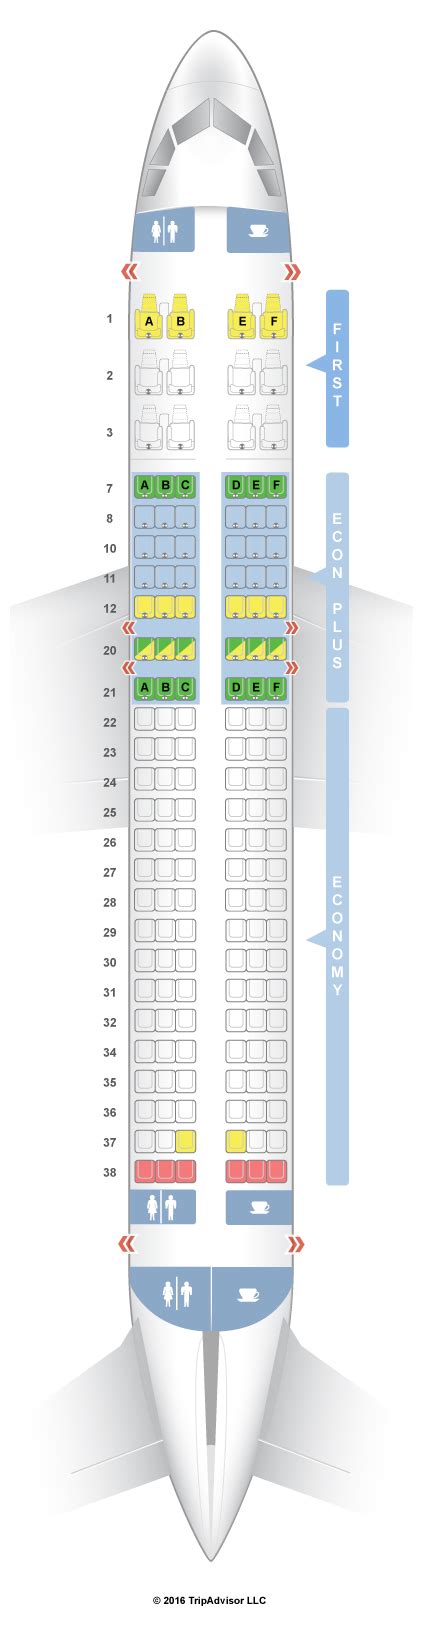 Airbus A Seating Map Image To U